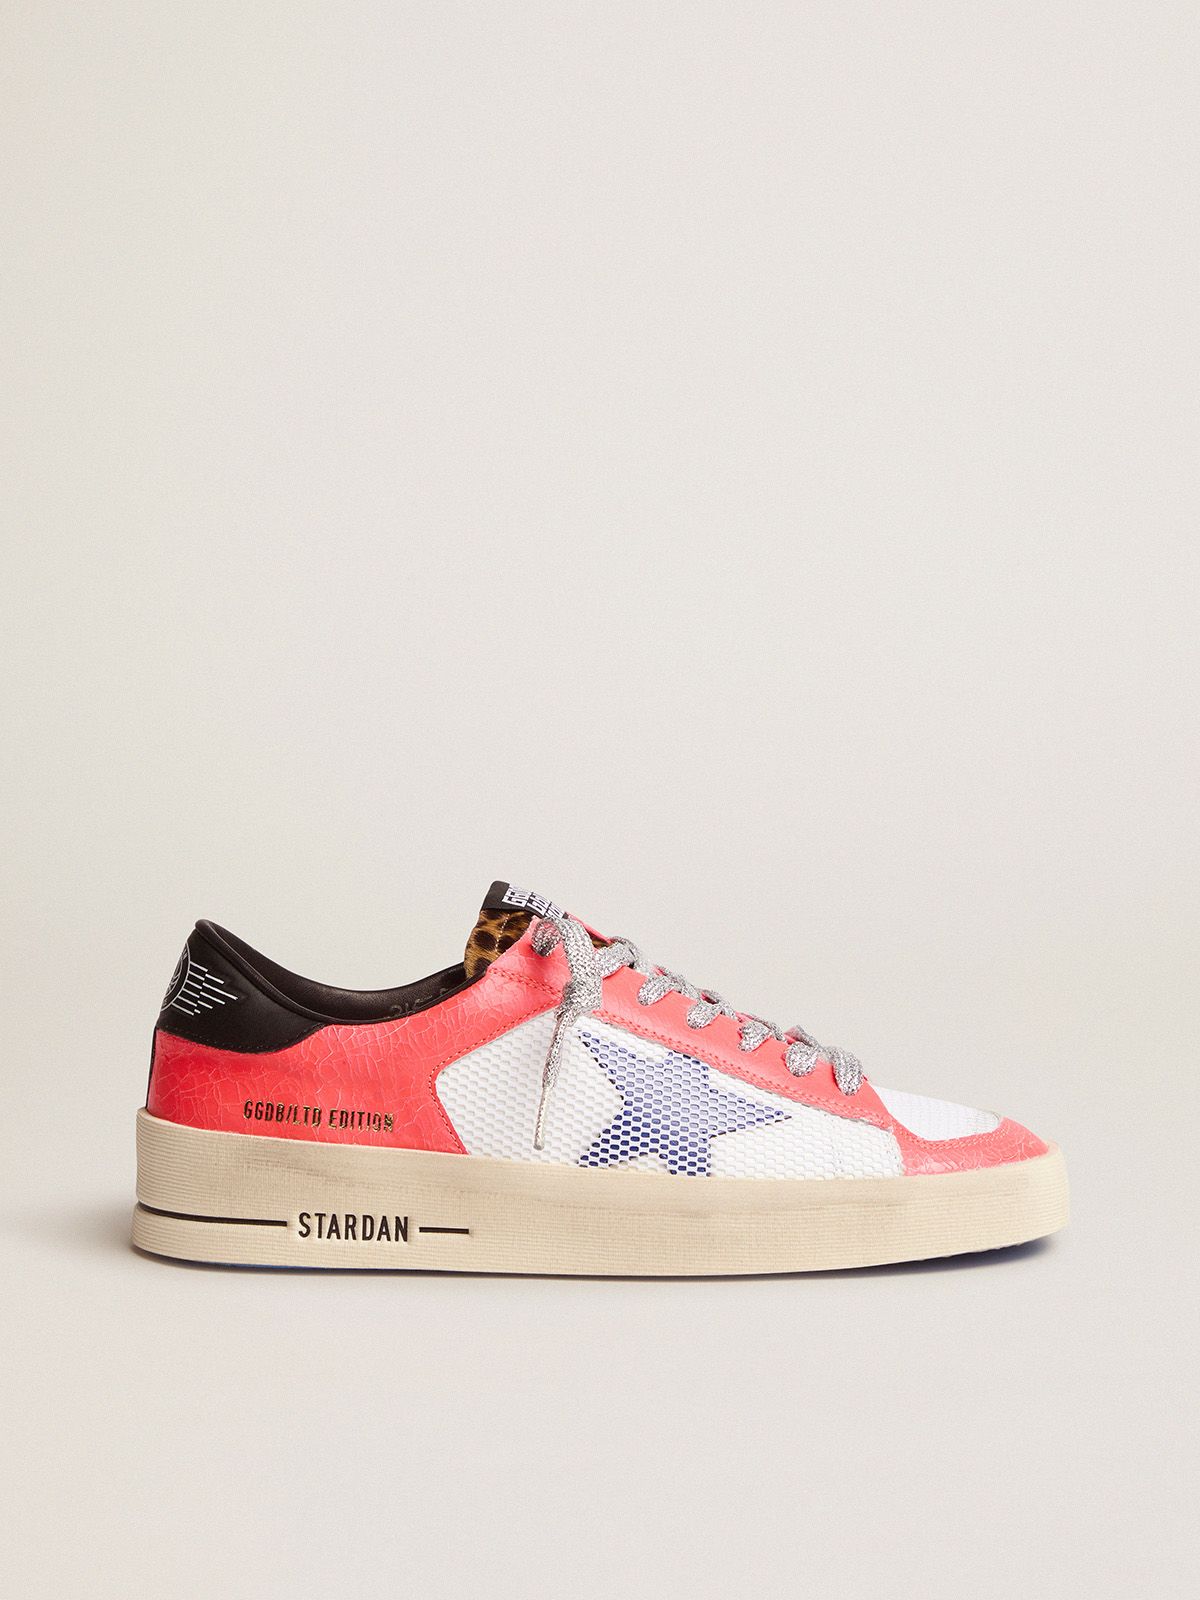 golden goose craquelé Edition sneakers Limited skin and LAB leather Women's pony in Stardan